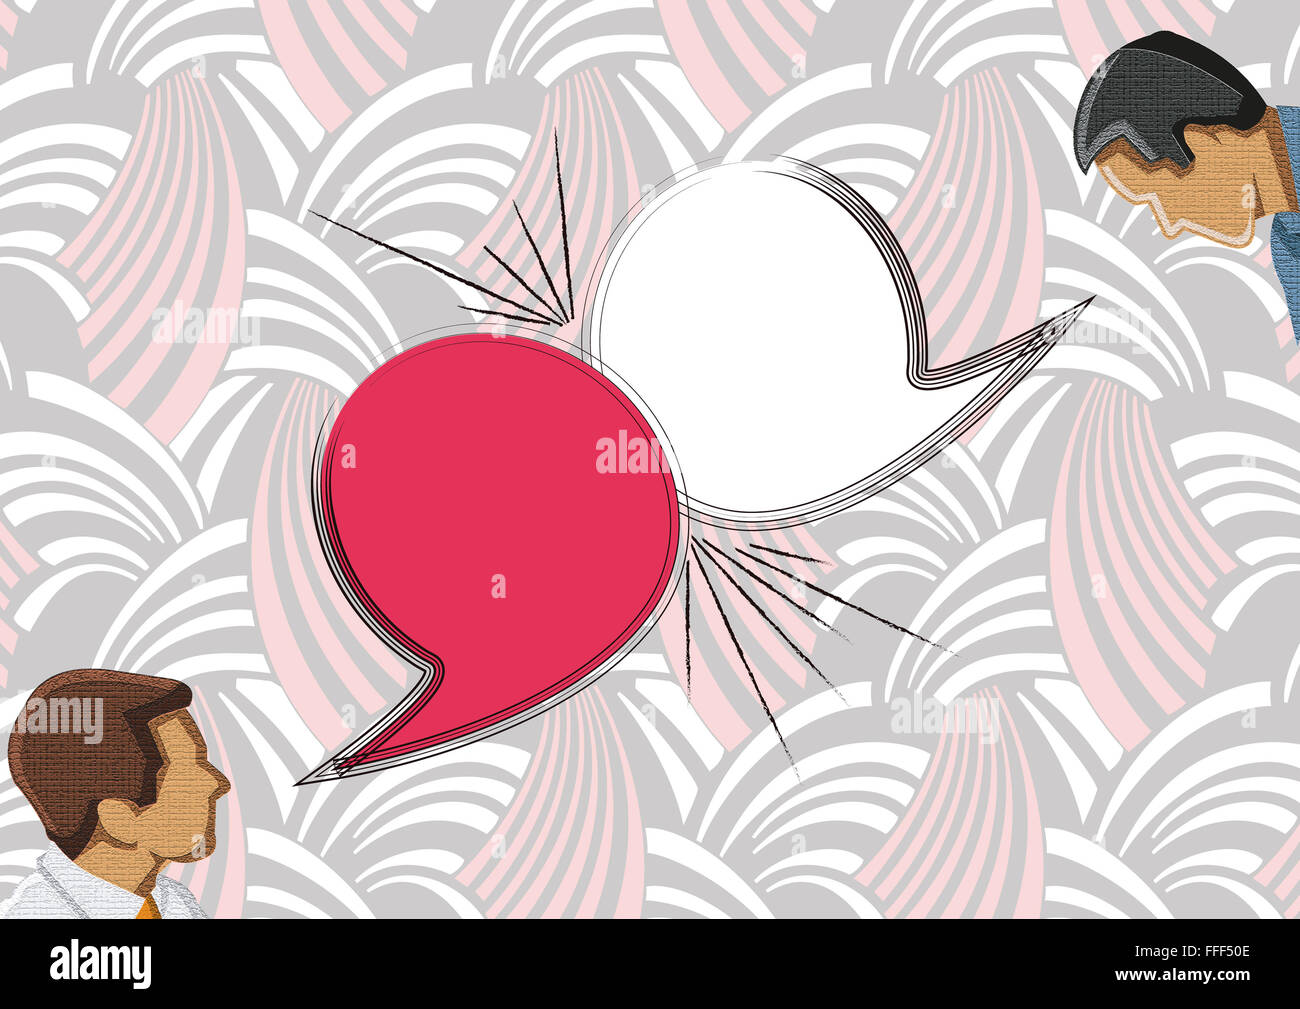 Dialog - Speech bubbles with two faces Stock Photo